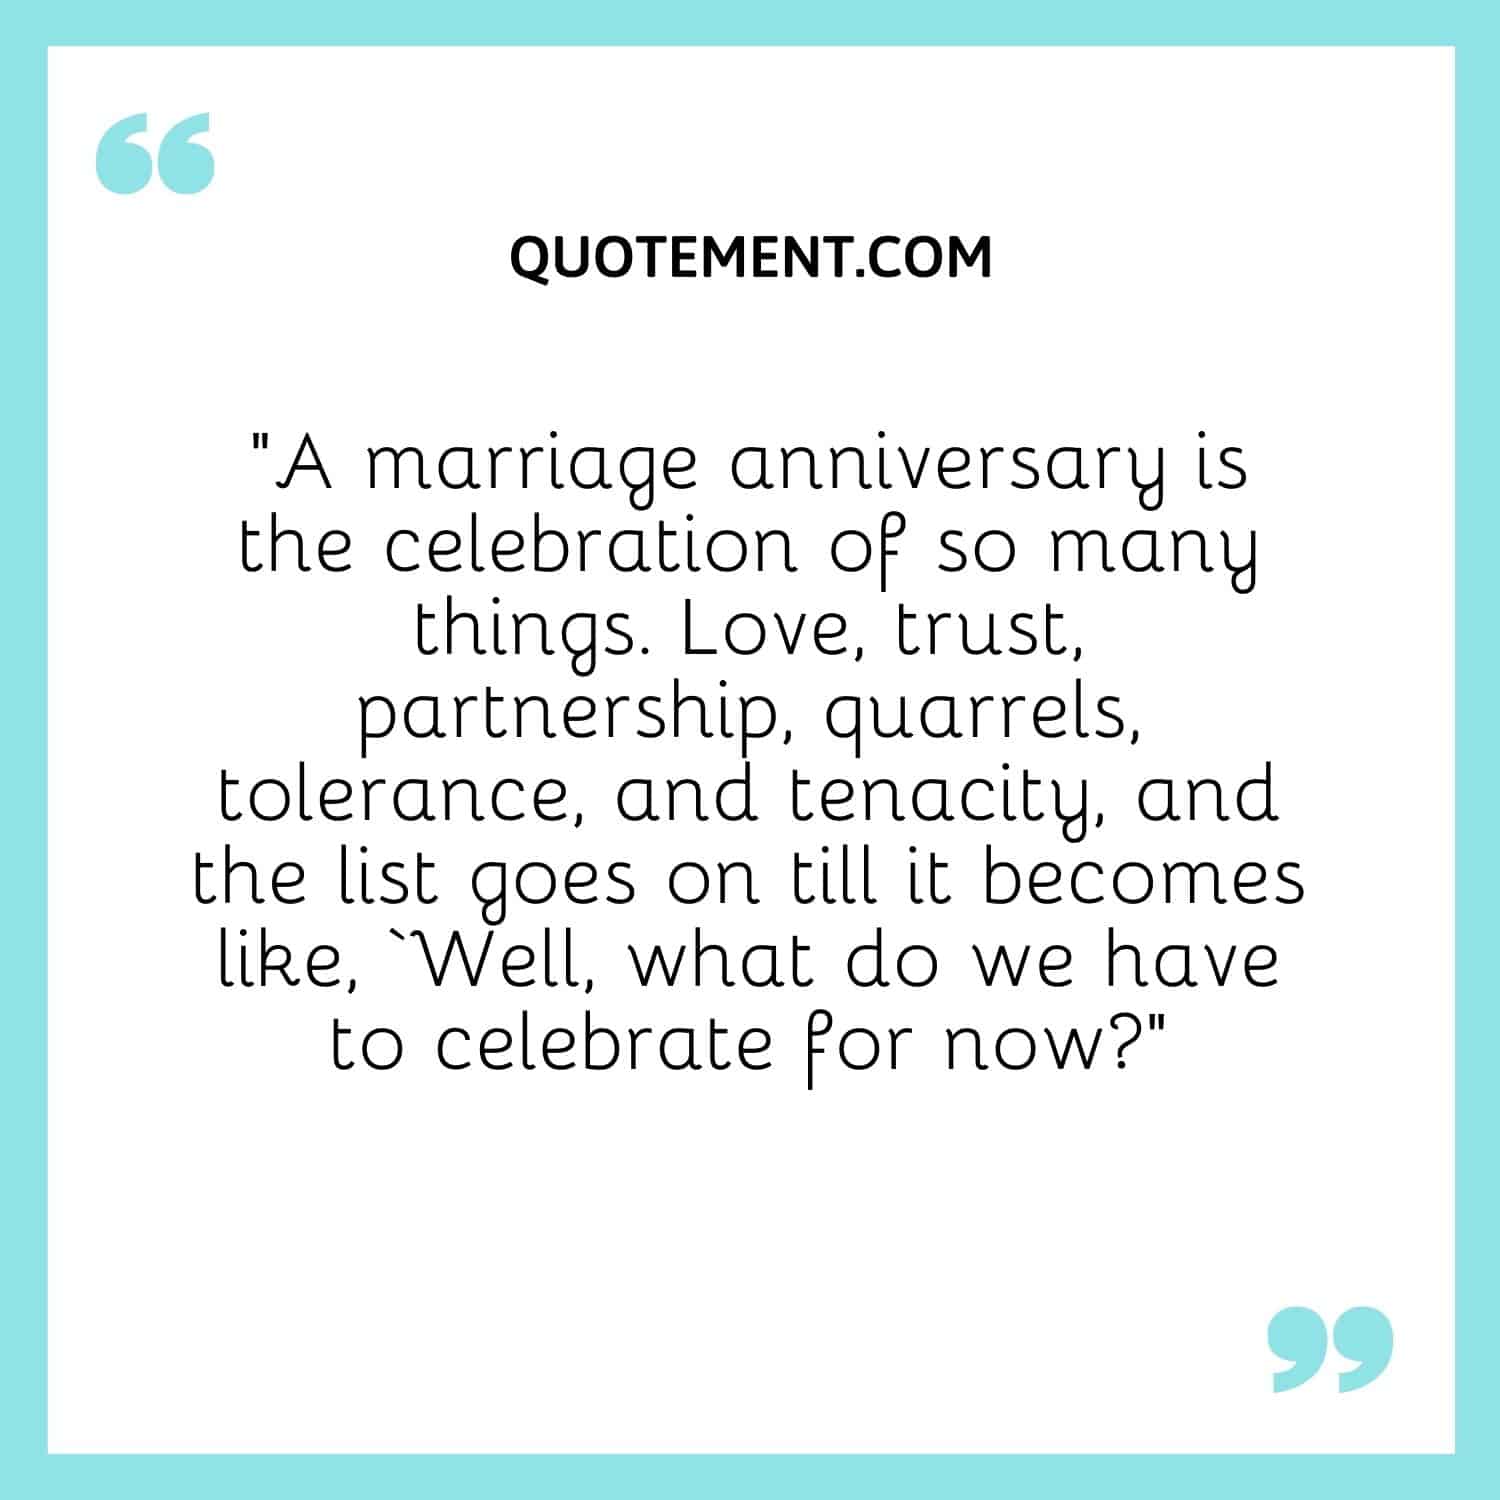 A marriage anniversary is the celebration of so many things